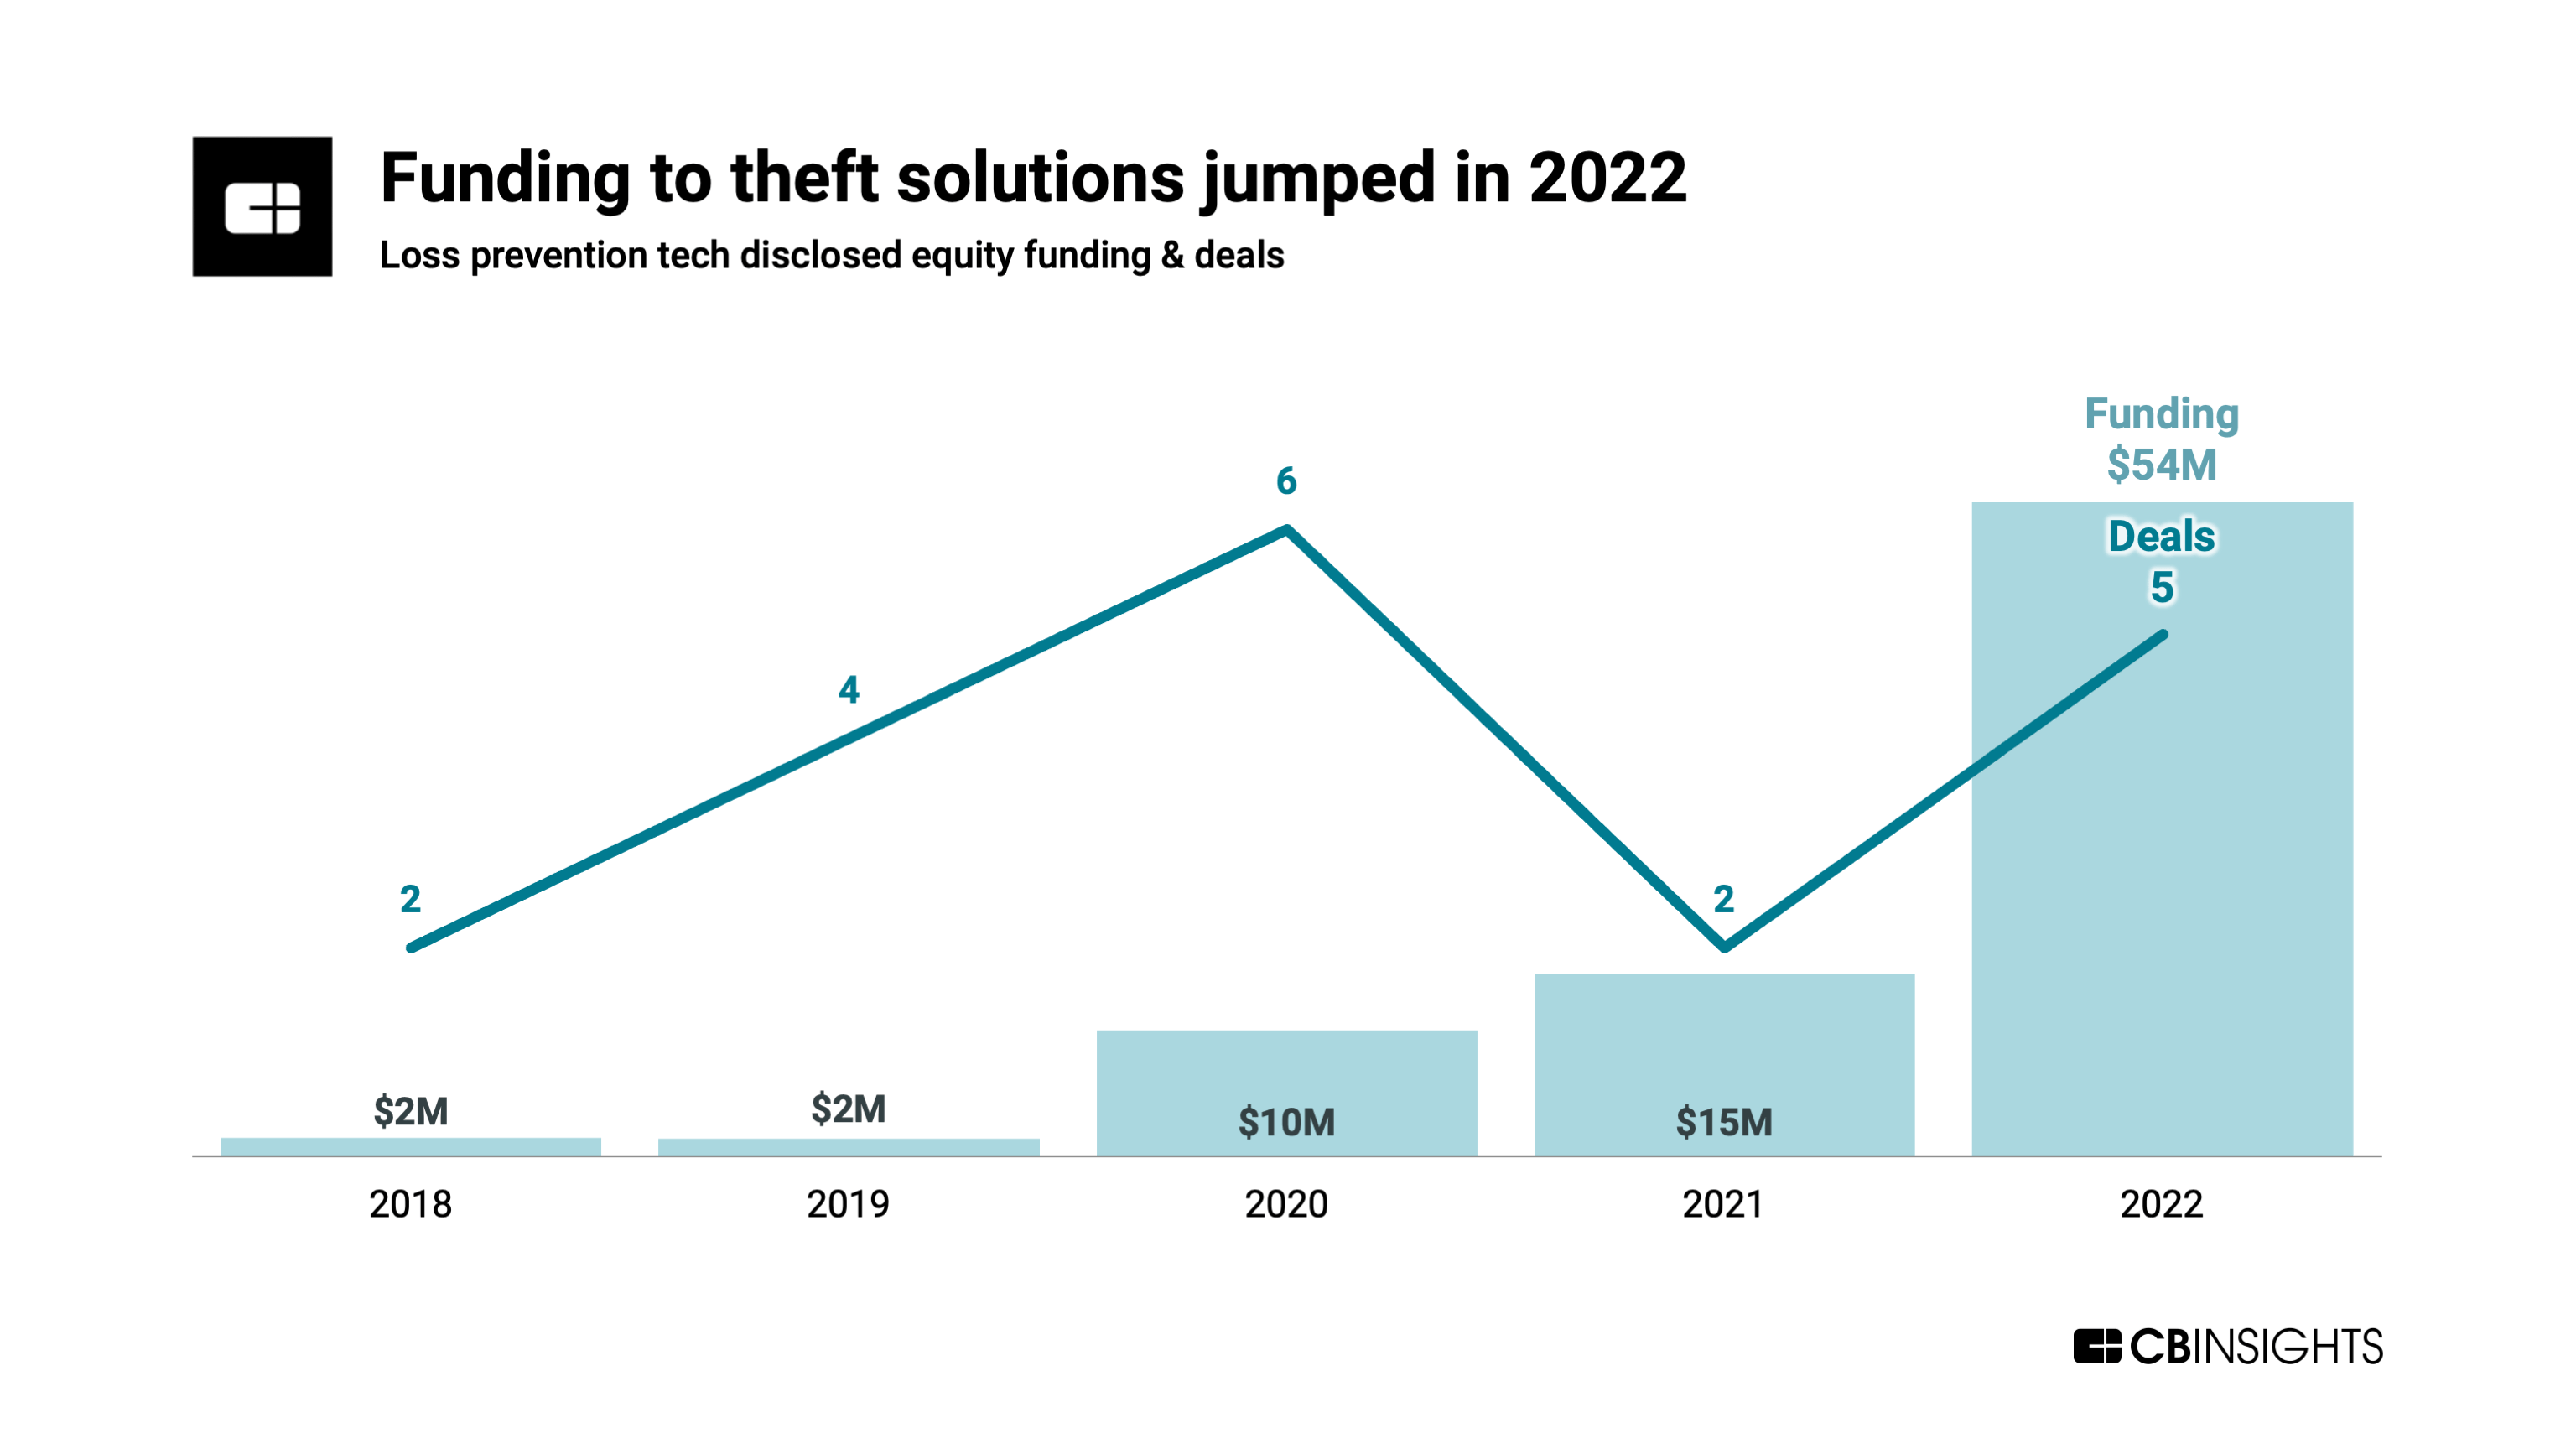 The 95B retail theft problem is an untapped opportunity for tech